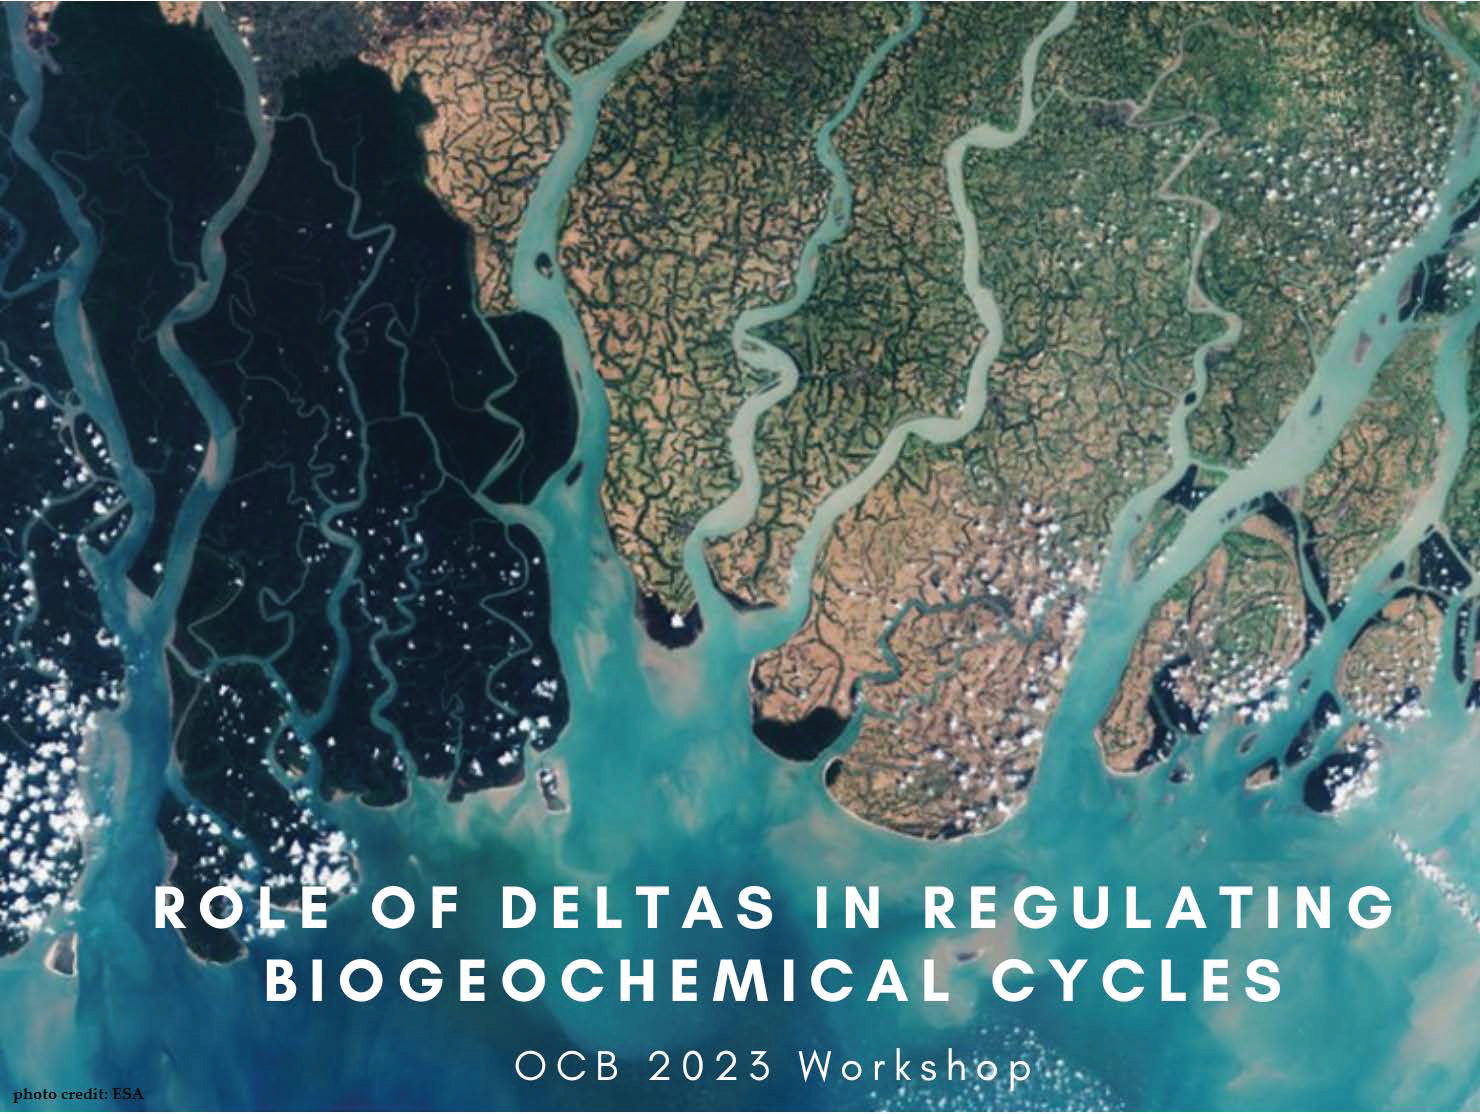 Role of deltas in regulating biogeochemical cycles_Final